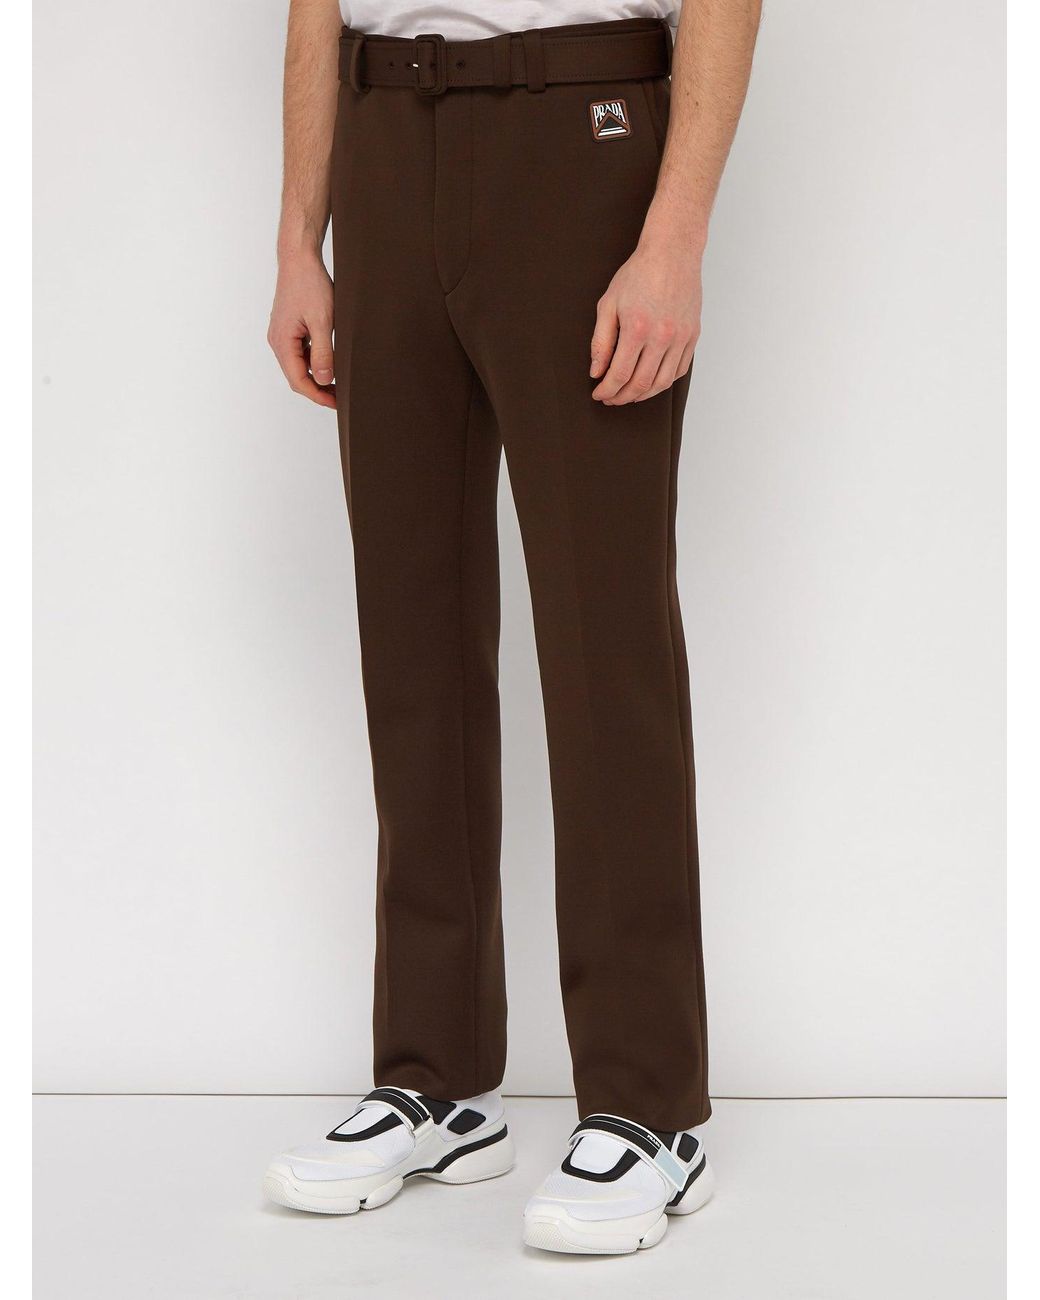 Prada Rubber Belted Straight-leg Technical-jersey Trousers in Dark 